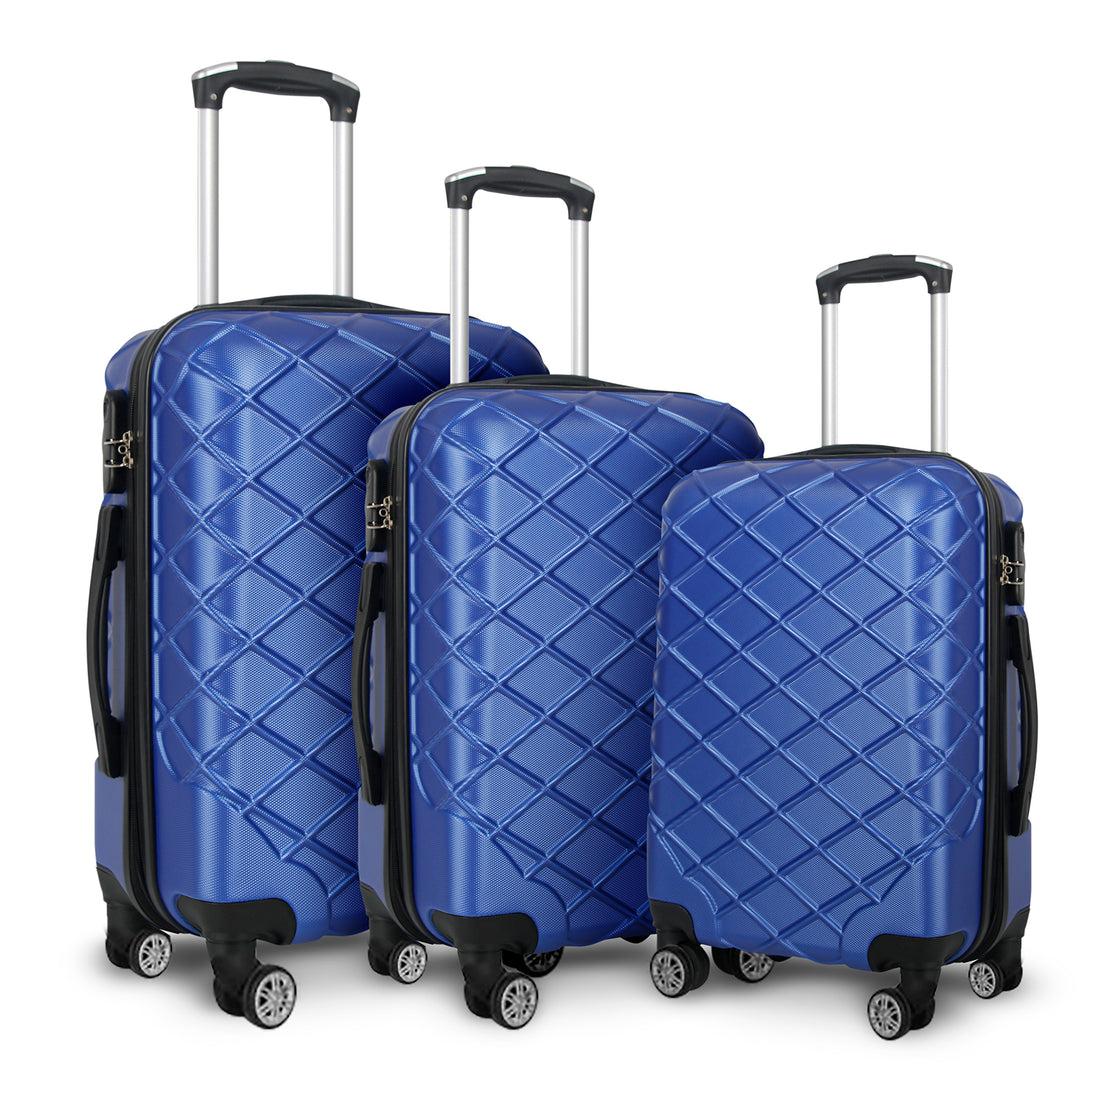 Milano Decor Luxury Travel Luggage Set ABS Hard Case Durable Lightweight-Luggage-PEROZ Accessories